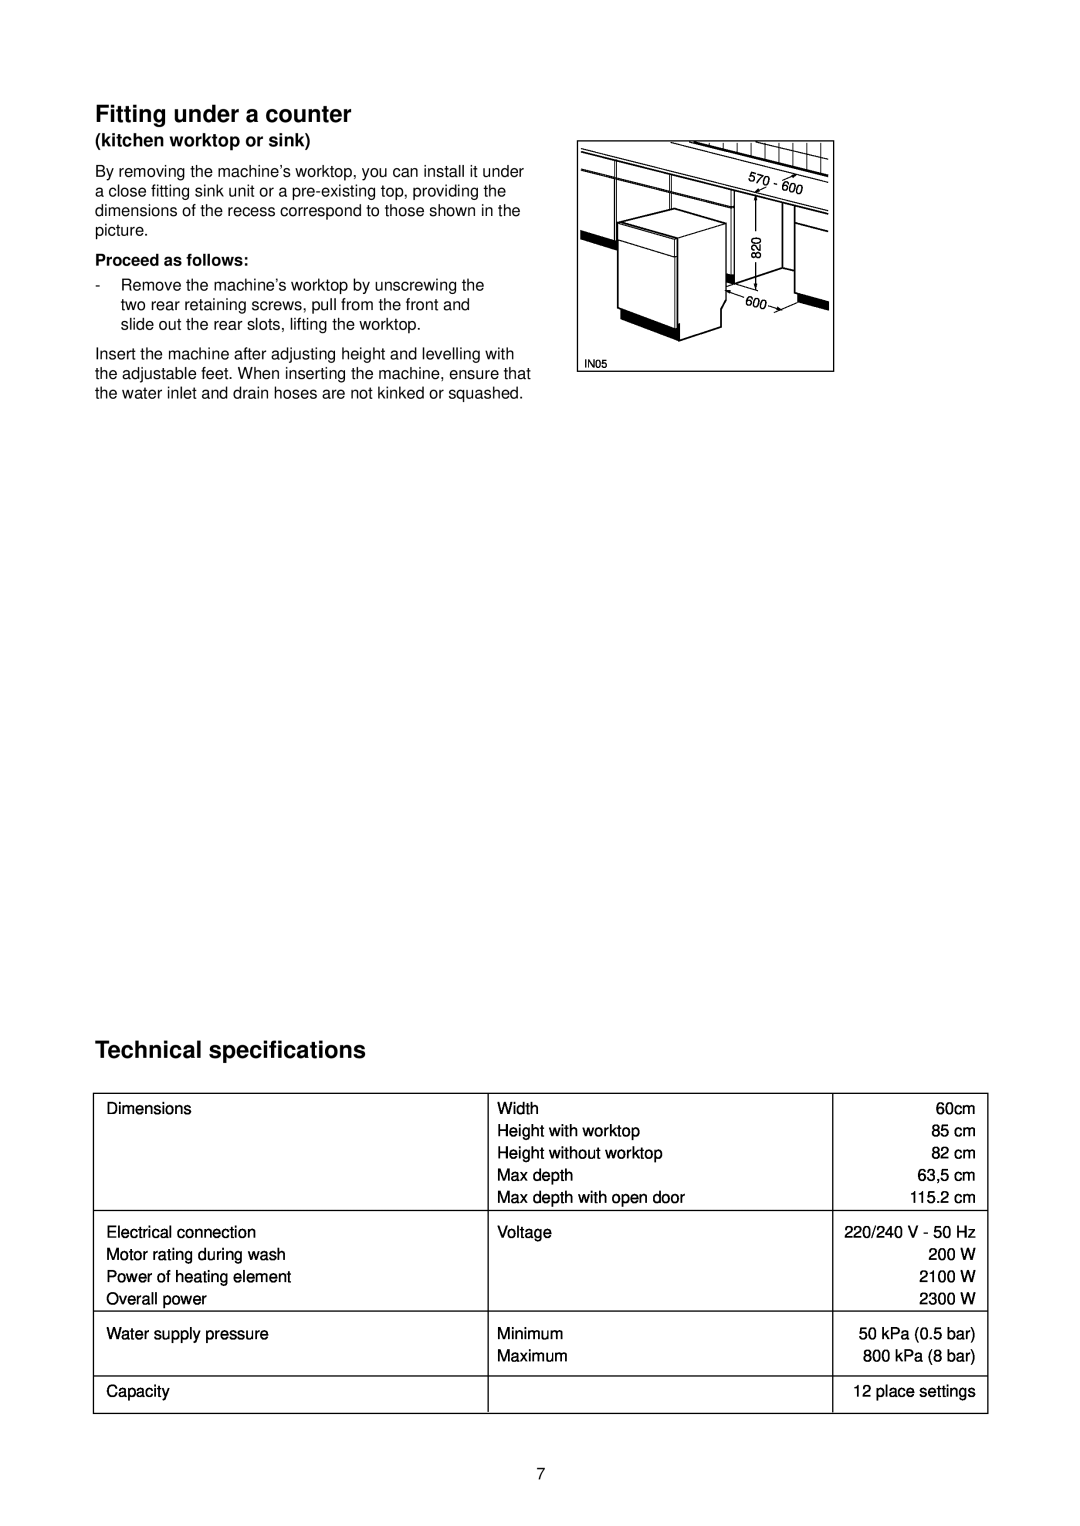 Zanussi DA 6141 manual Fitting under a counter, Technical specifications, kitchen worktop or sink, Proceed as follows 